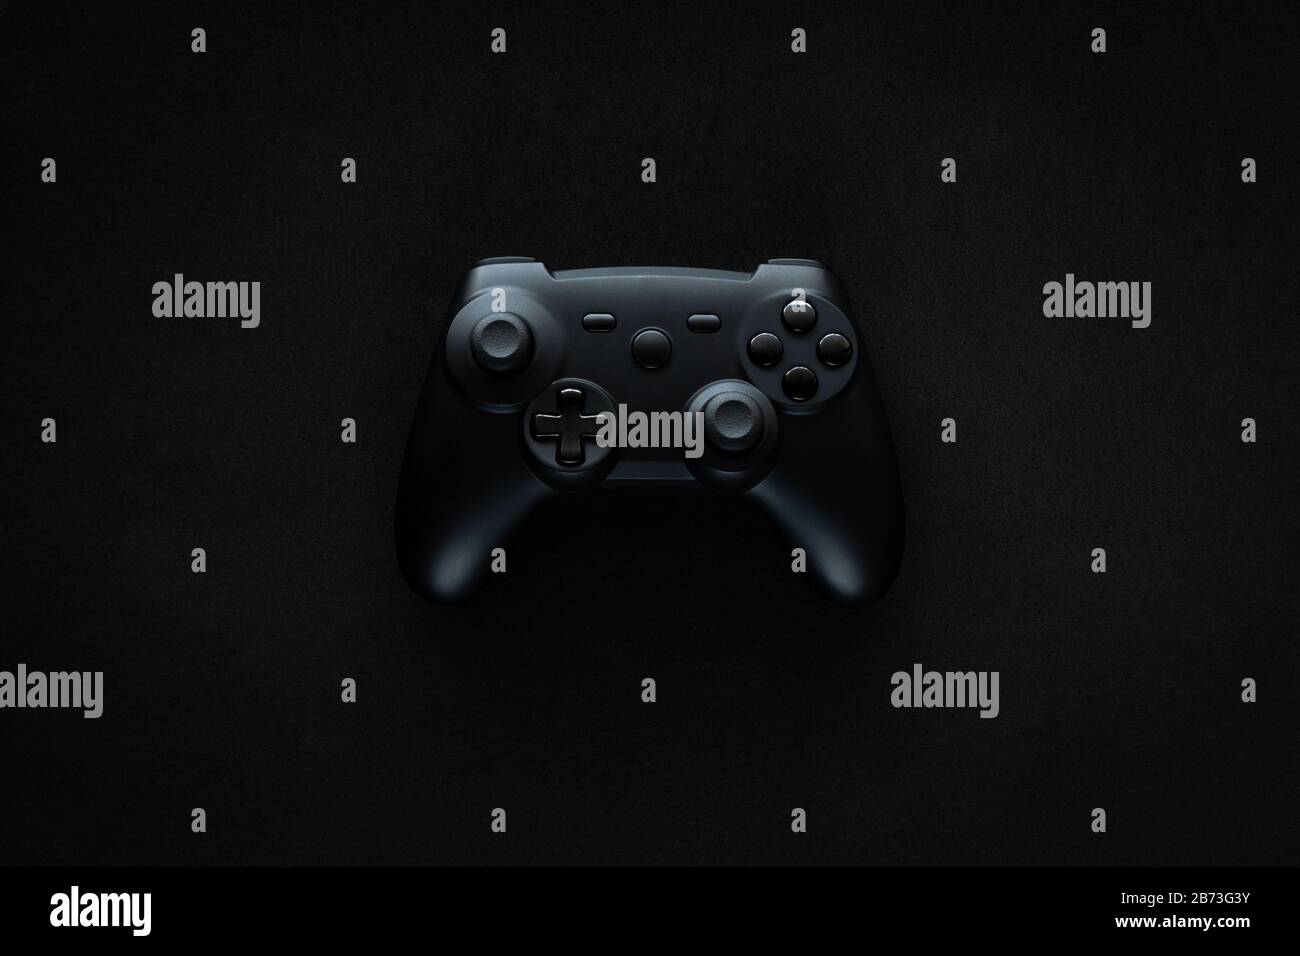 Game Controller High Resolution Stock Photography and Images - Alamy